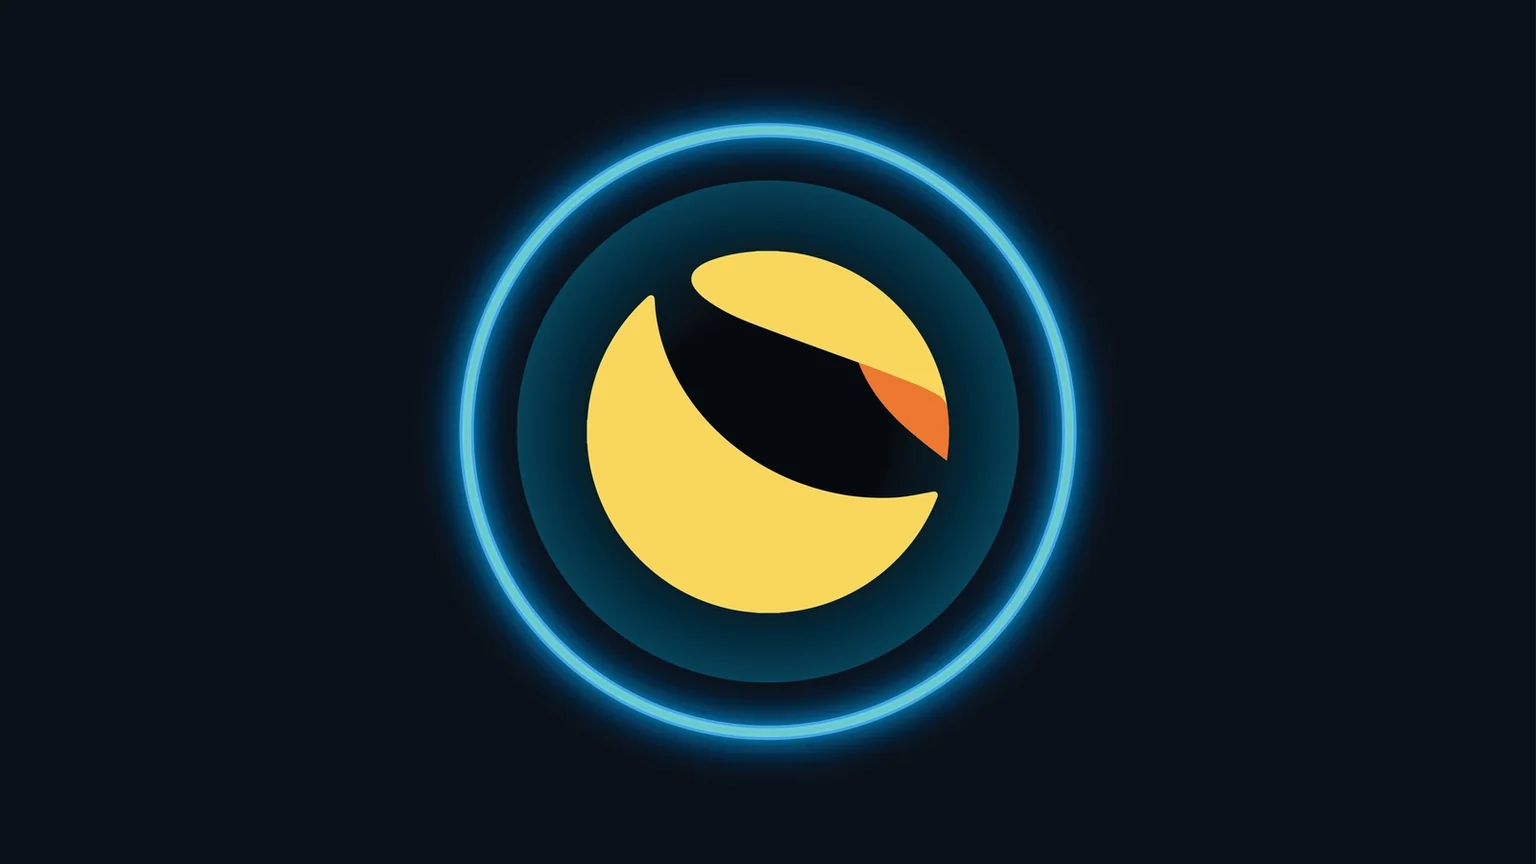 The Terra cryptocurrency logo. 